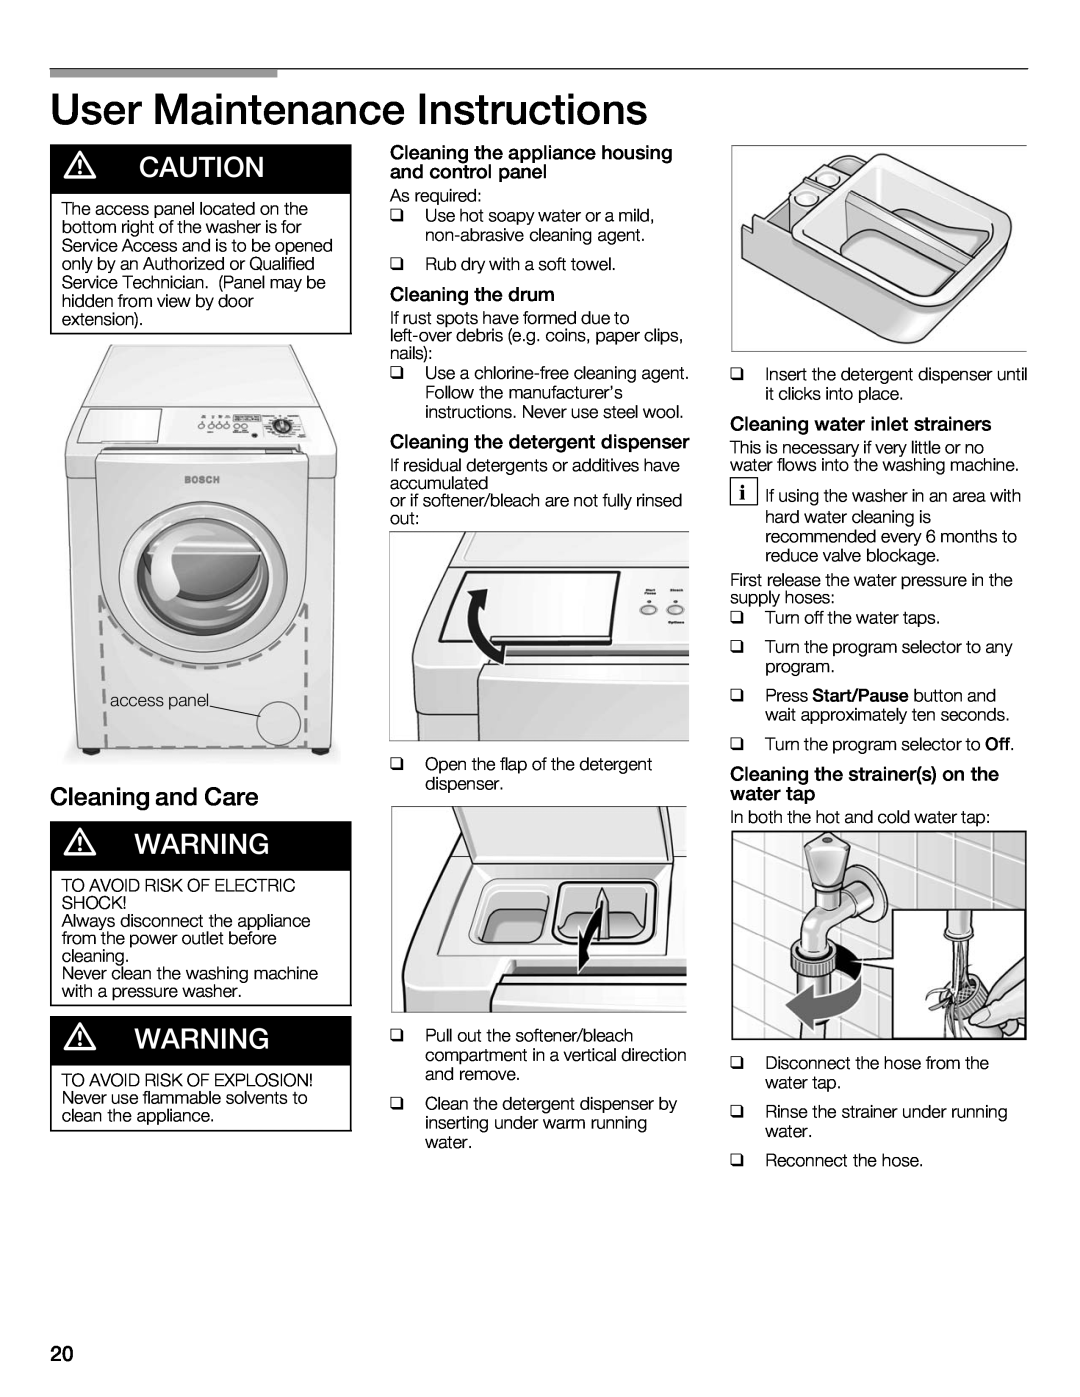 Bosch Appliances 500 Plus Series manual User Maintenance Instructions, d CAUTION, d WARNING, Cleaning and Care 